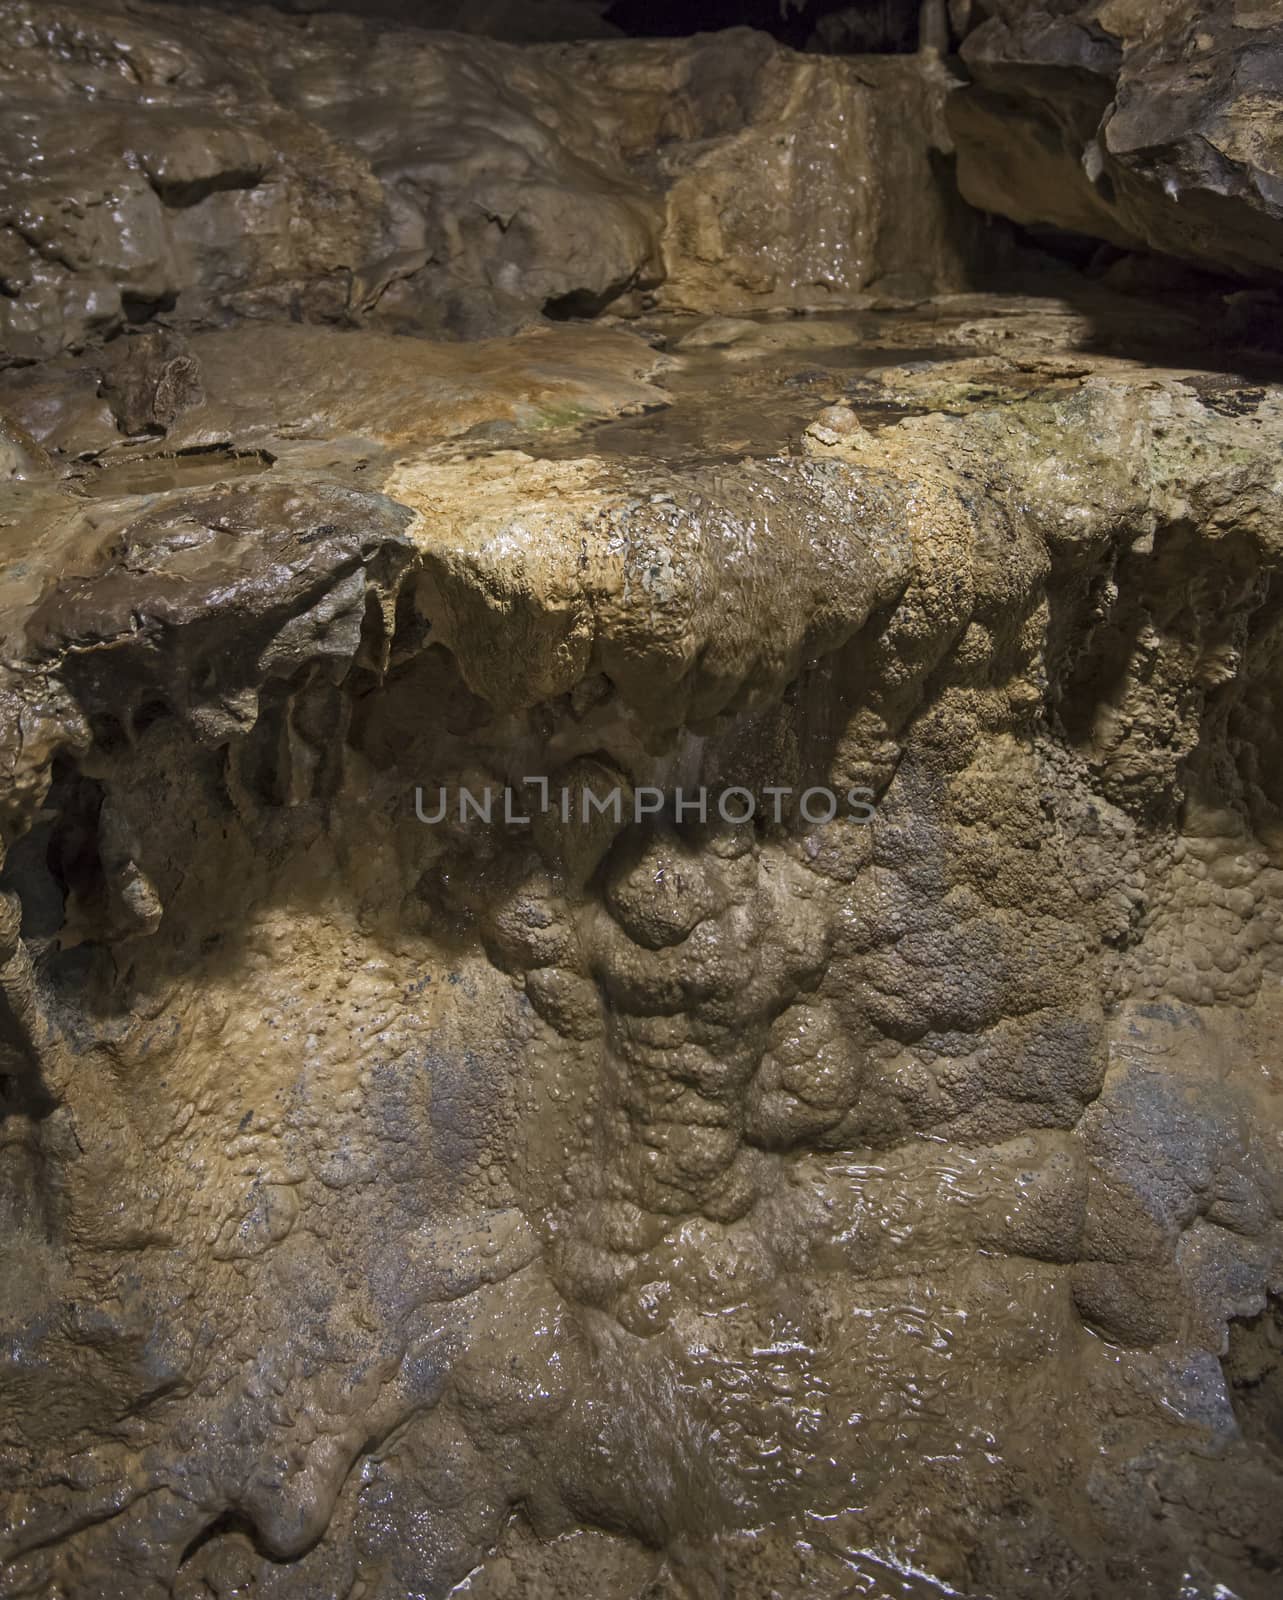 Closeup detail of geological rock formations in underground subterranean limestone cave cavern